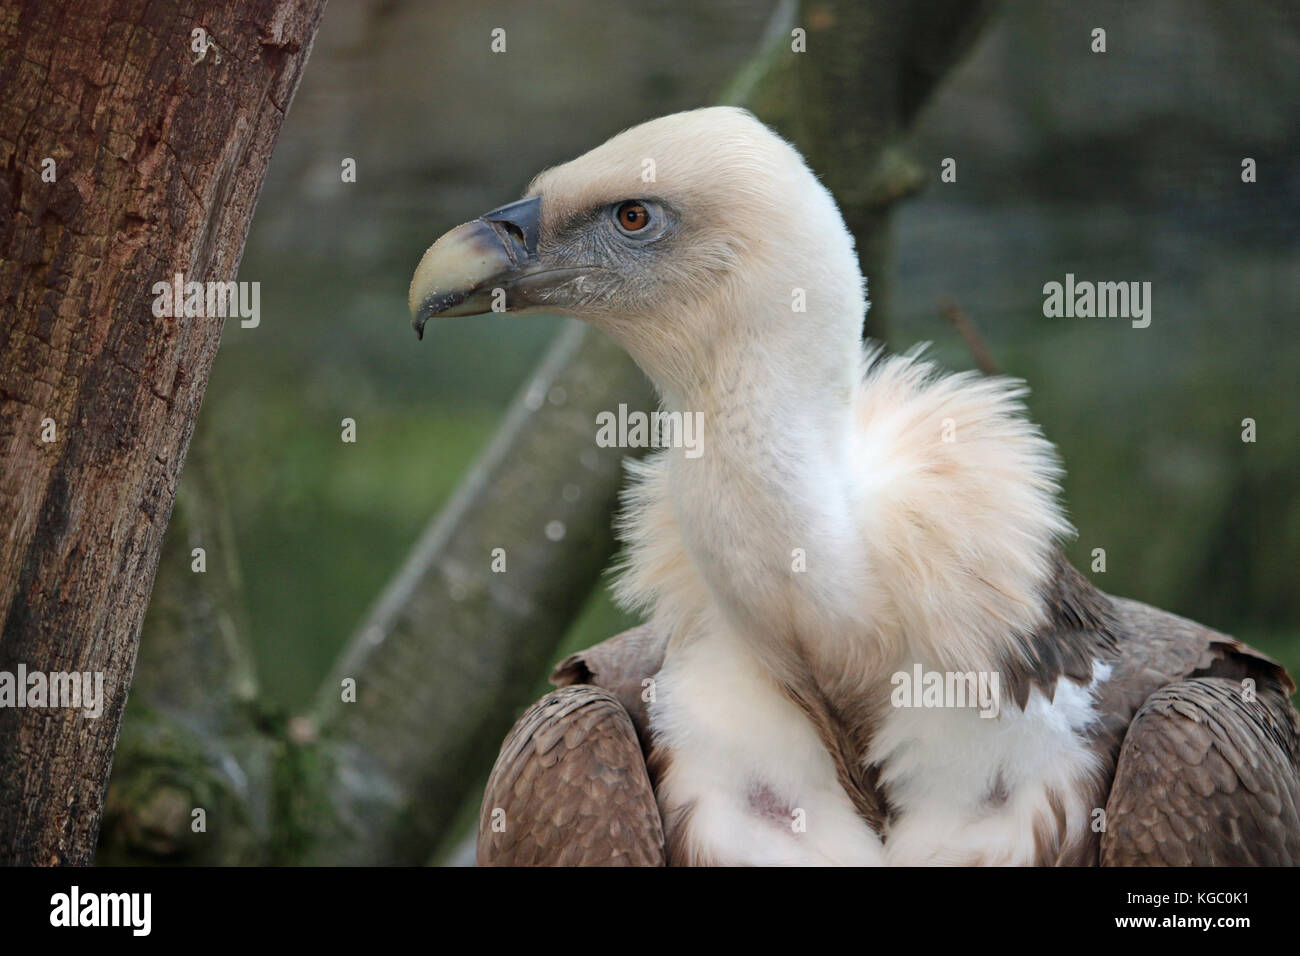 Rüppell's griffon vulture (Gyps rueppelli) with head in profile sitting on a tree with a blurred background. Stock Photo